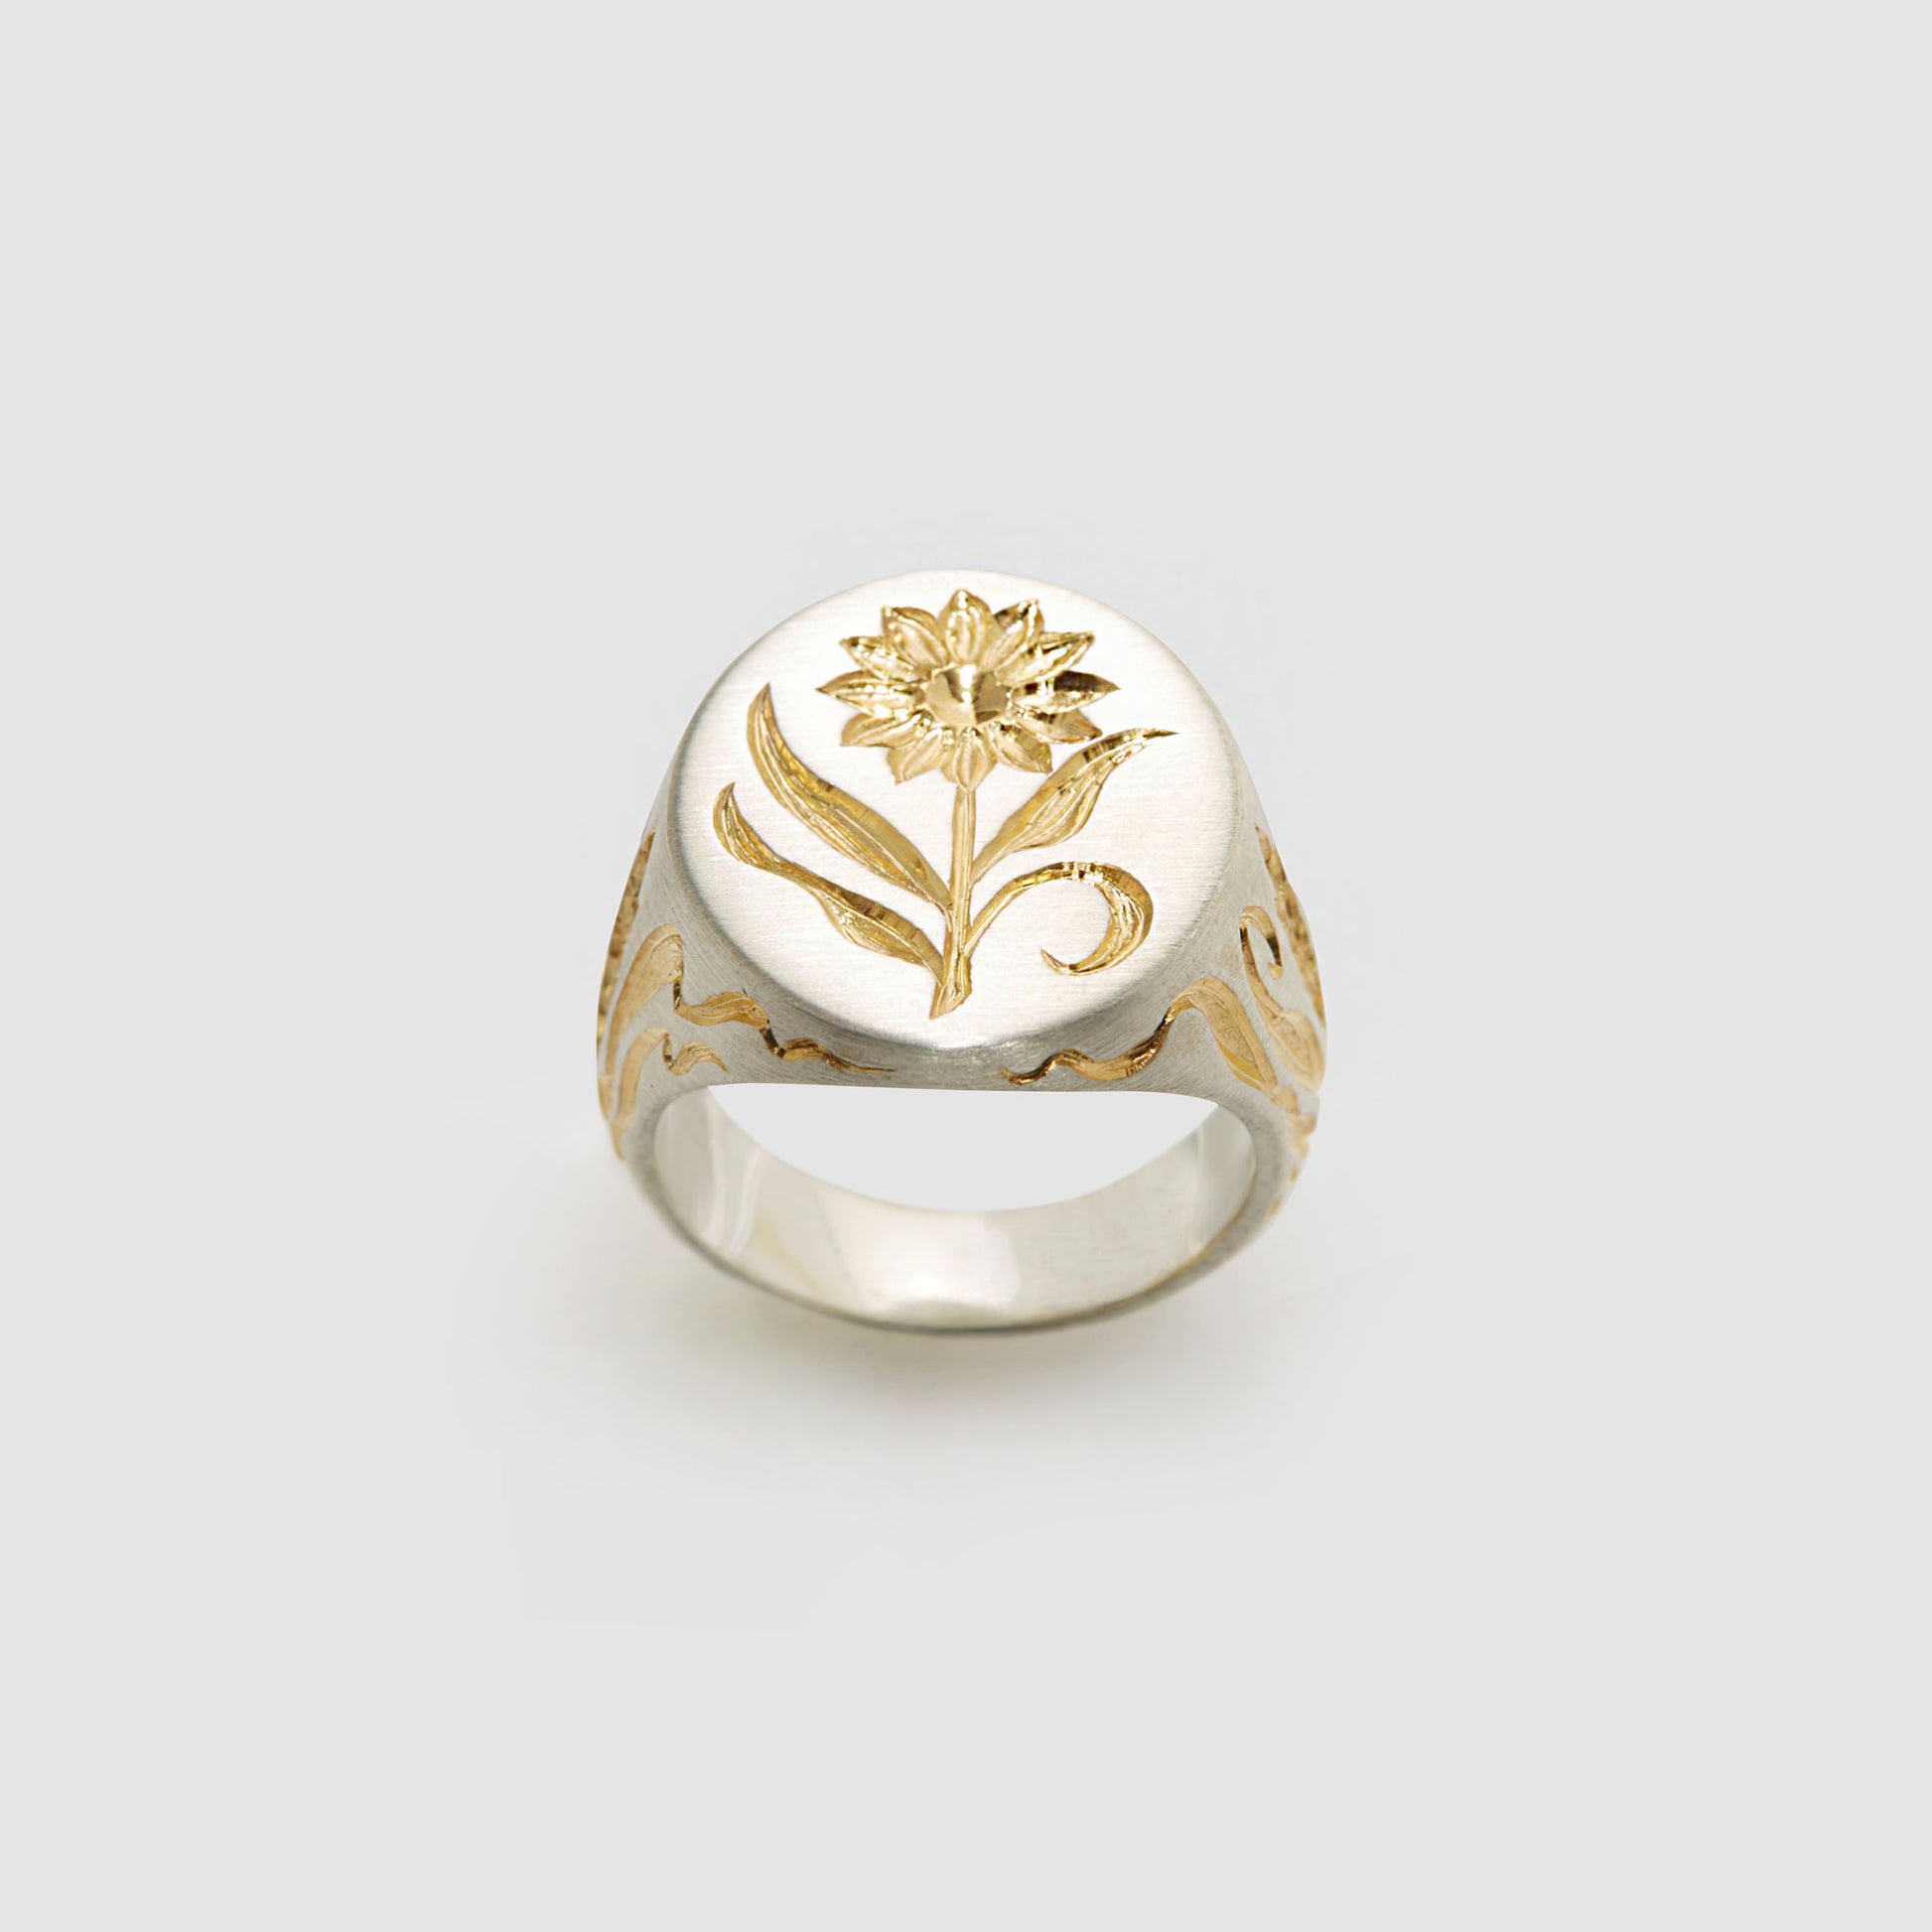 Castro Smith - Hand engraved signet ring with a sunflower on the face of the ring and corn details on the sides. 